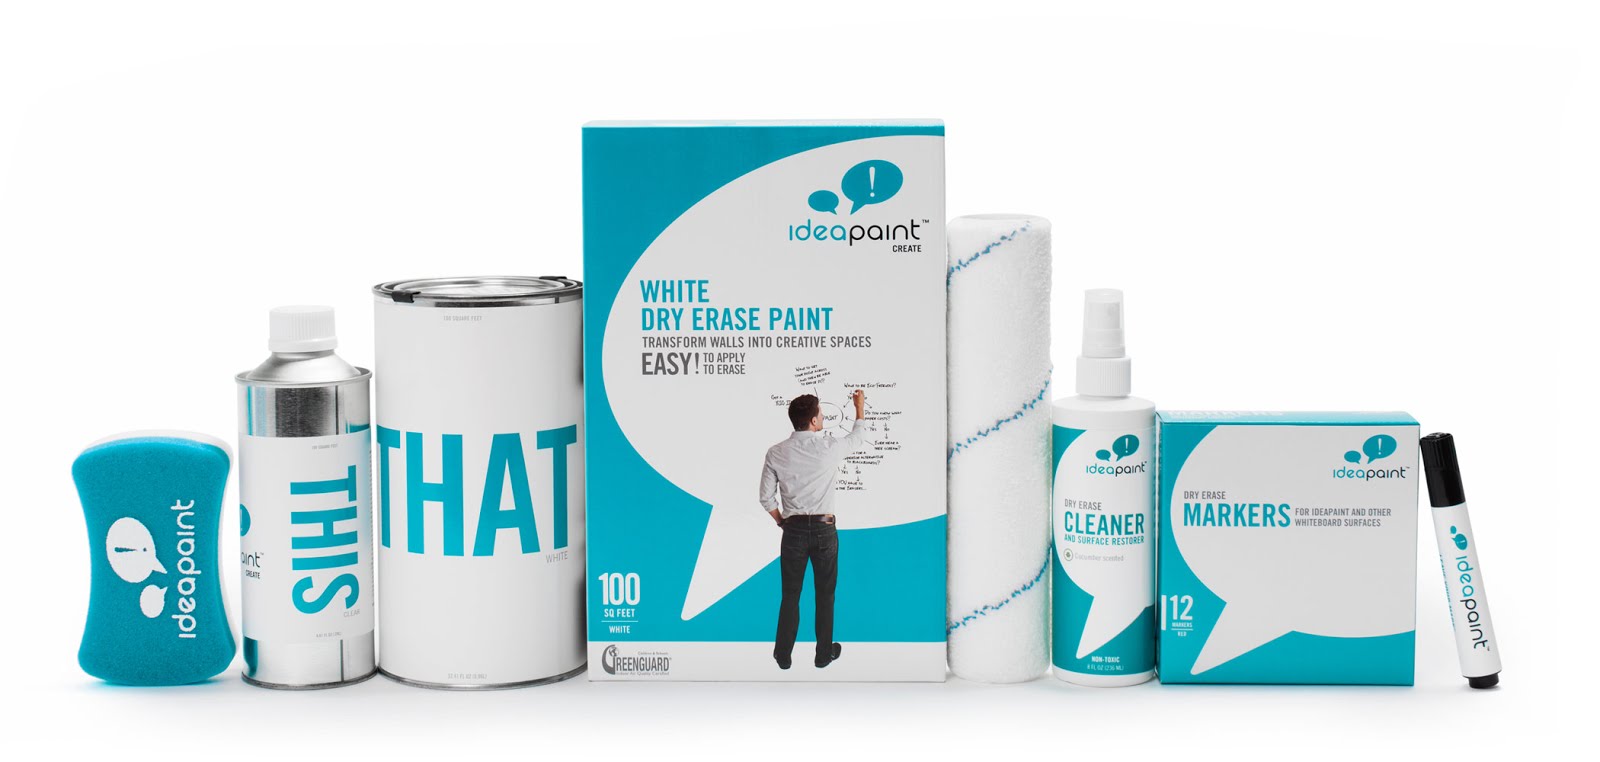 What's Creative? IdeaPaint The Paint to Keep Ideas Flowing